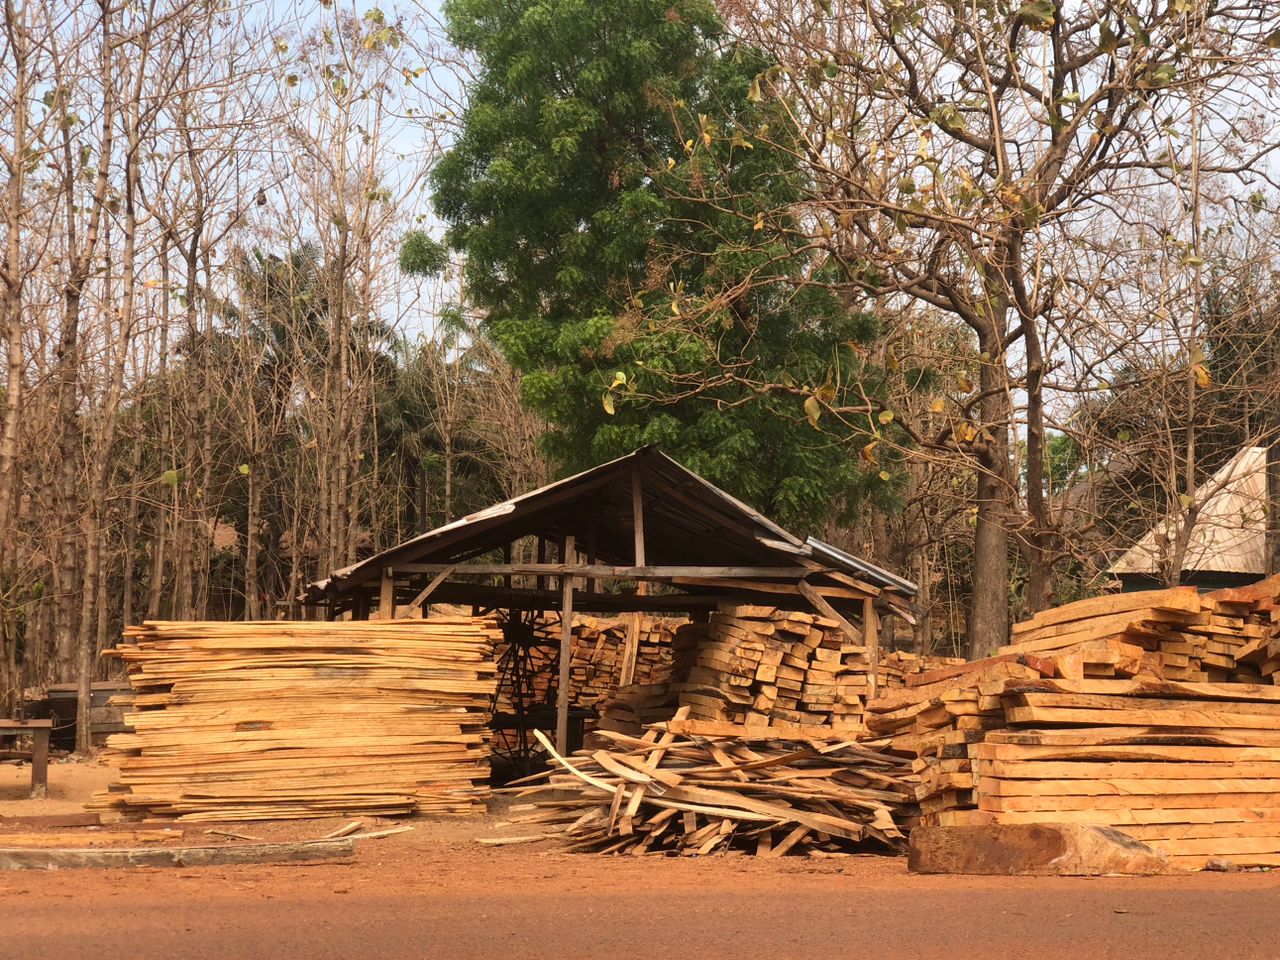 In Benue, farmers recount losses as Nigeria’s weak forest policy aids deforestation